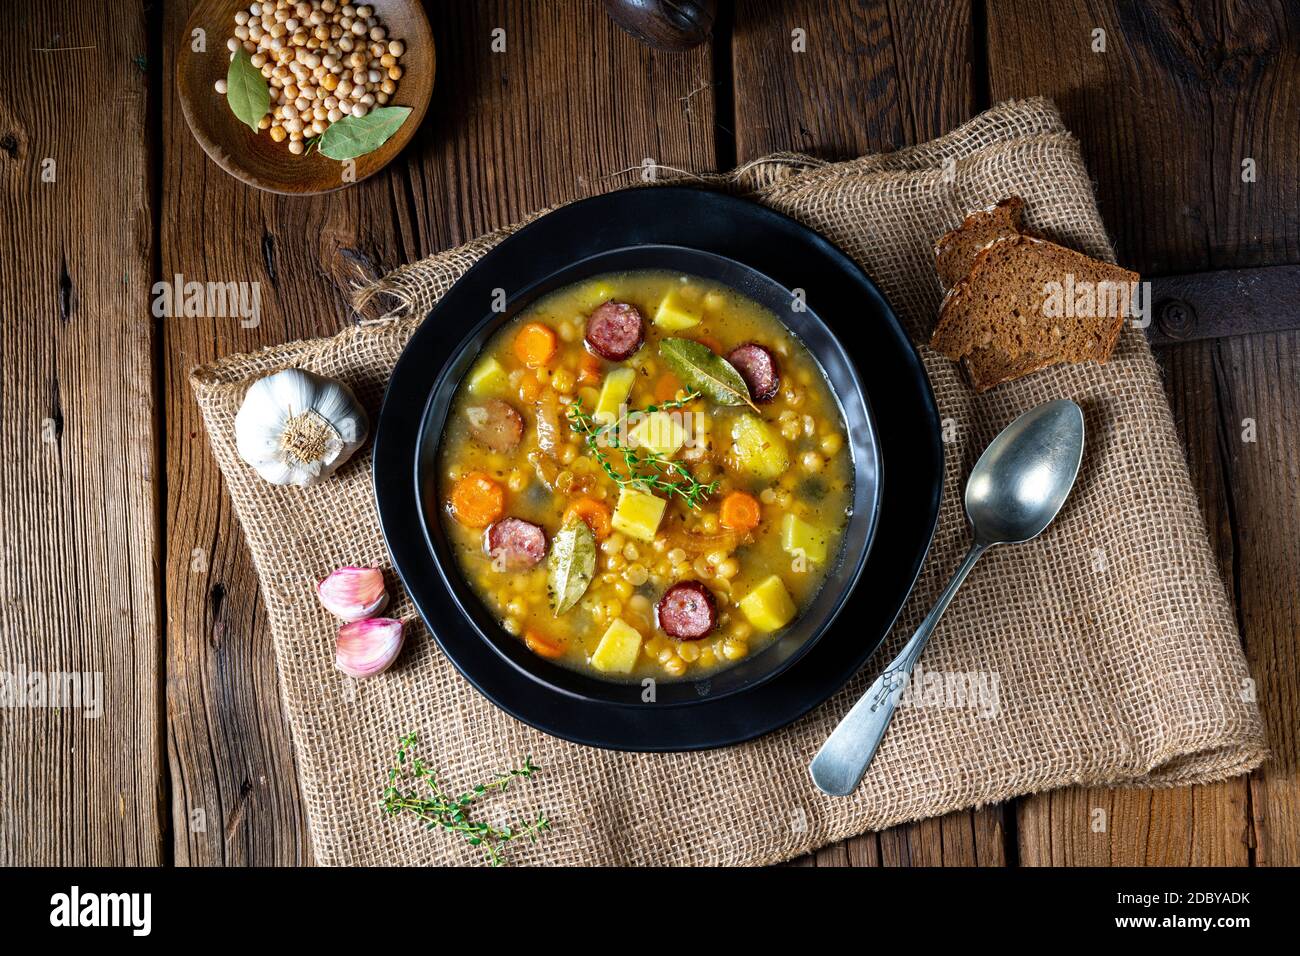 Rustic pea soup with bacon and sausages Stock Photo